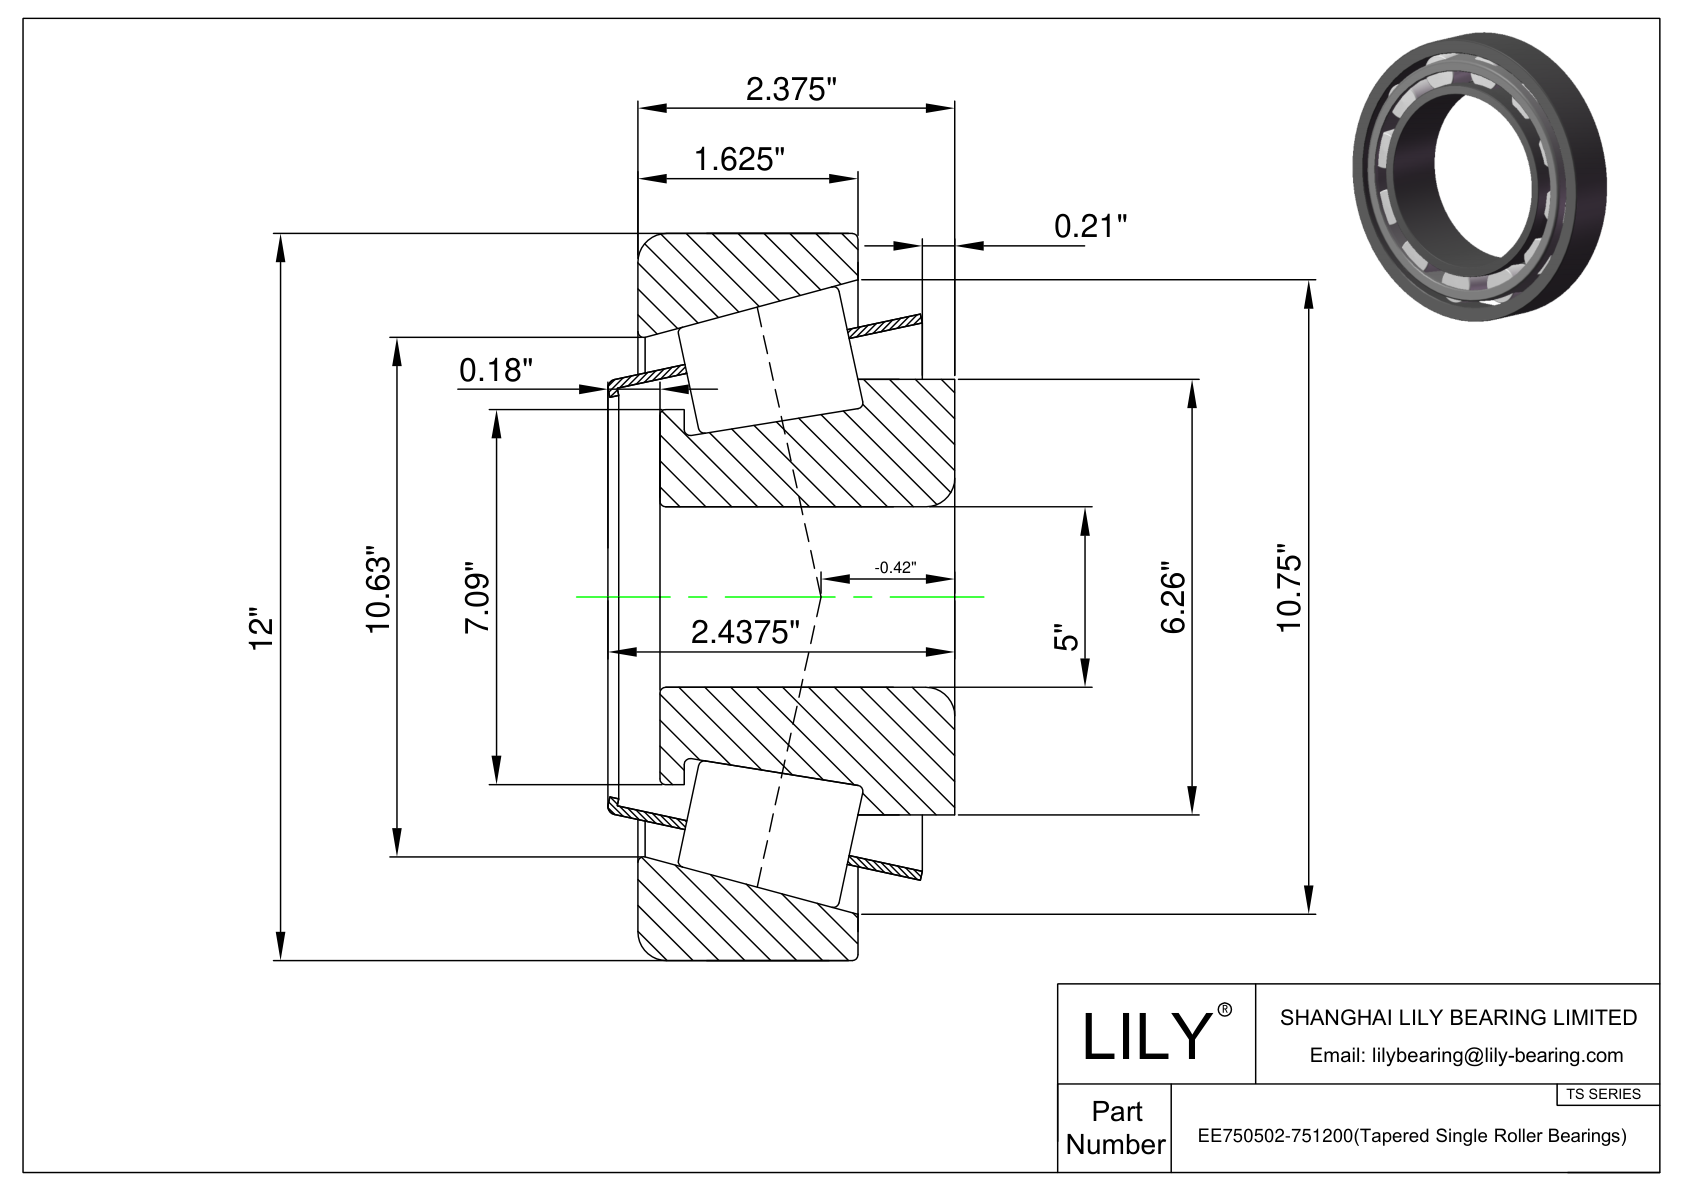 EE750502-751200 TS (Tapered Single Roller Bearings) (Imperial) cad drawing